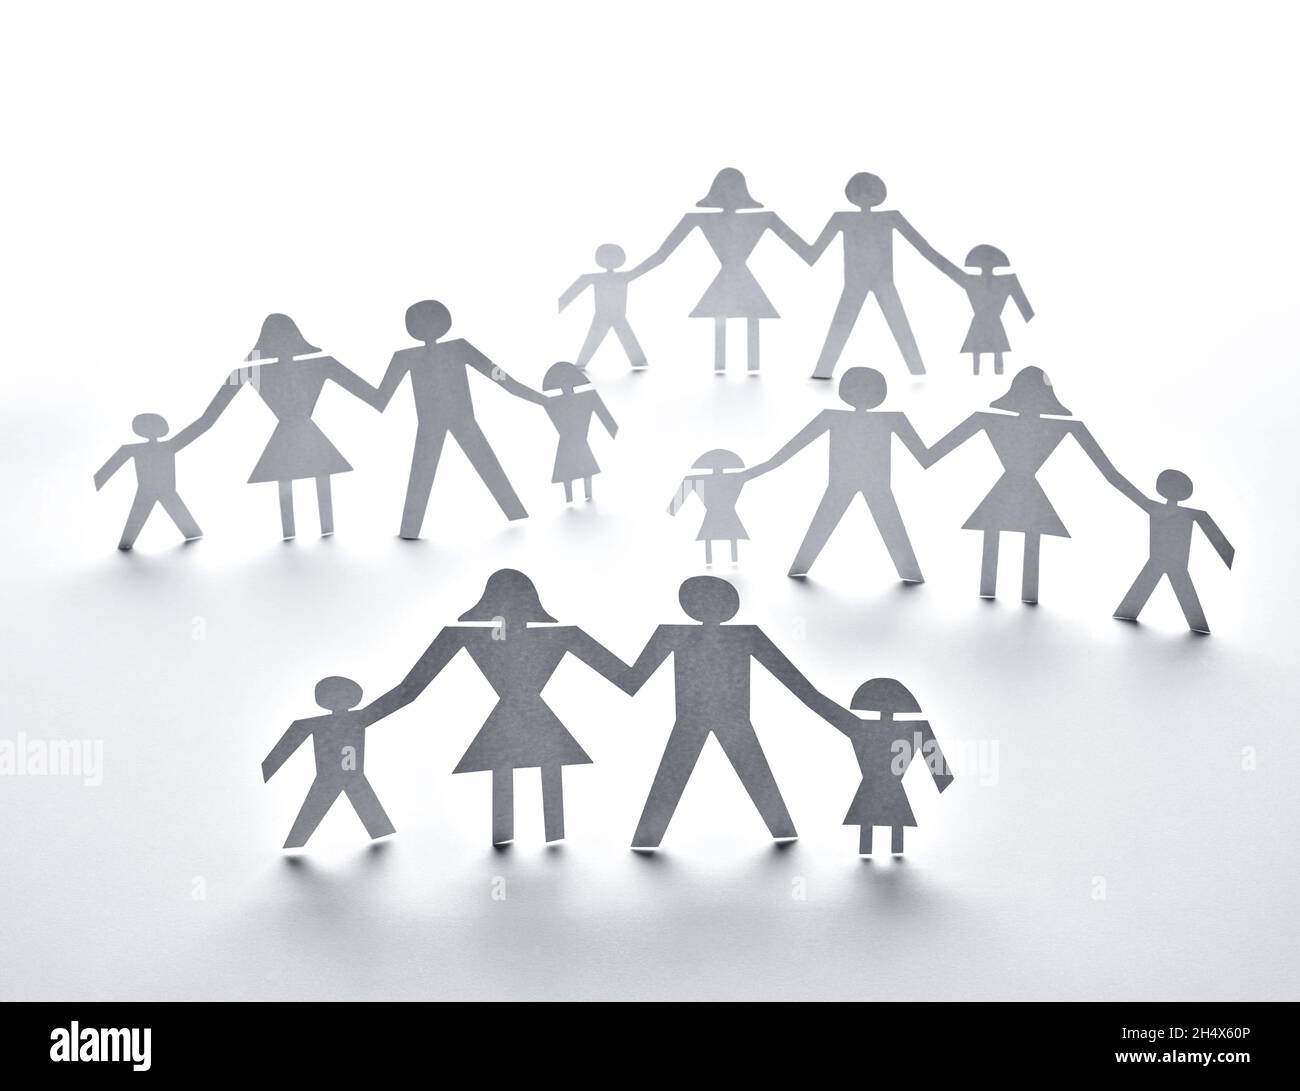 paper people community unity togetherness Stock Photo